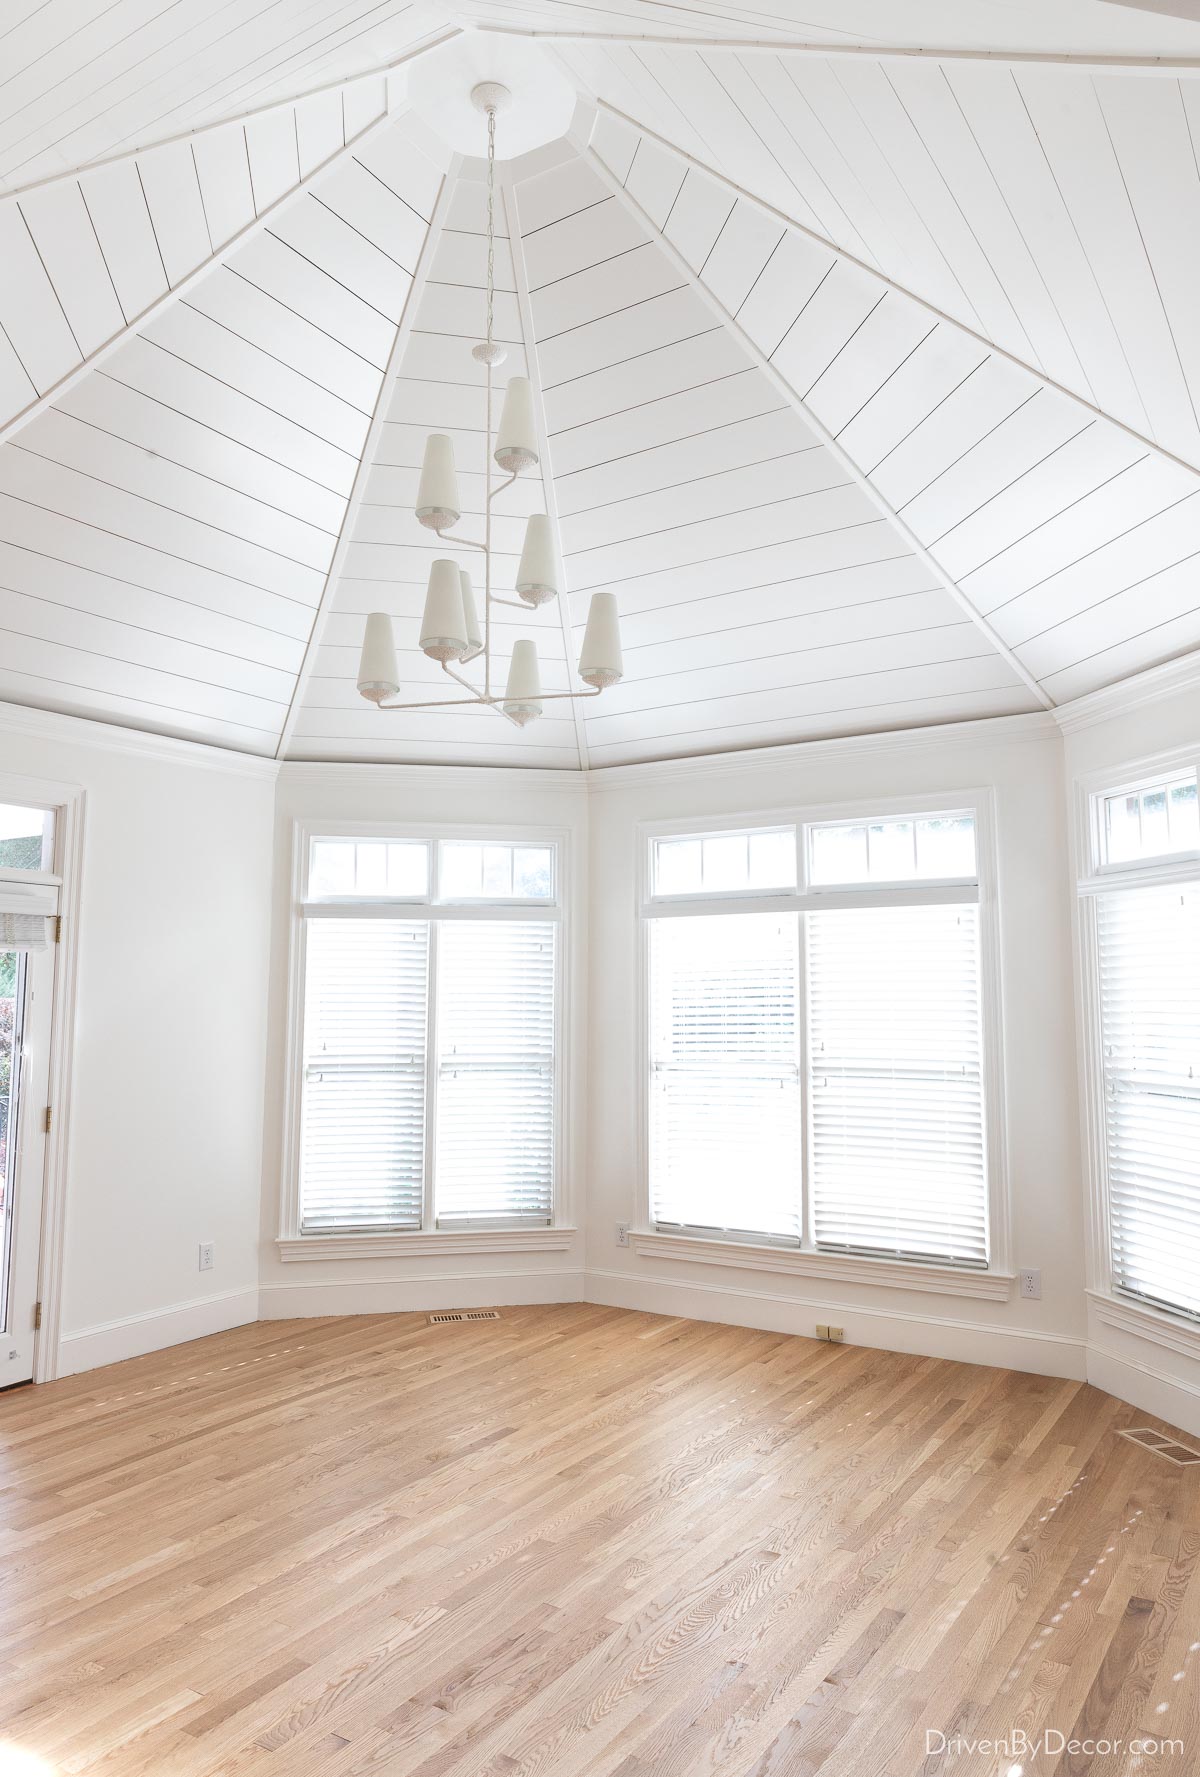 The shiplap ceiling in our sunroom